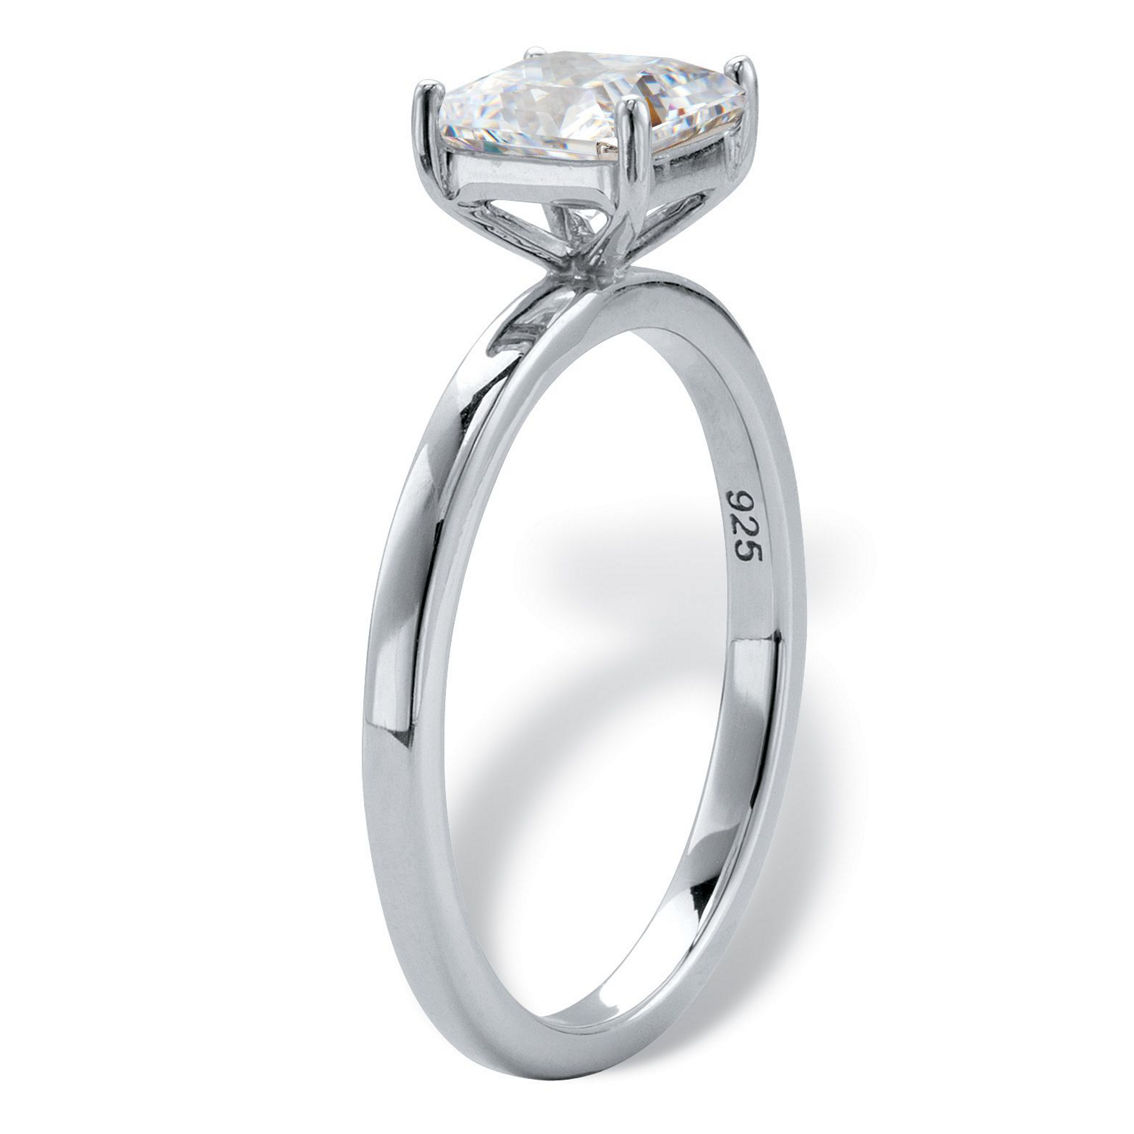 PalmBeach Princess-Cut Platinum-Plated Silver White Sapphire Engagement Ring - Image 2 of 5